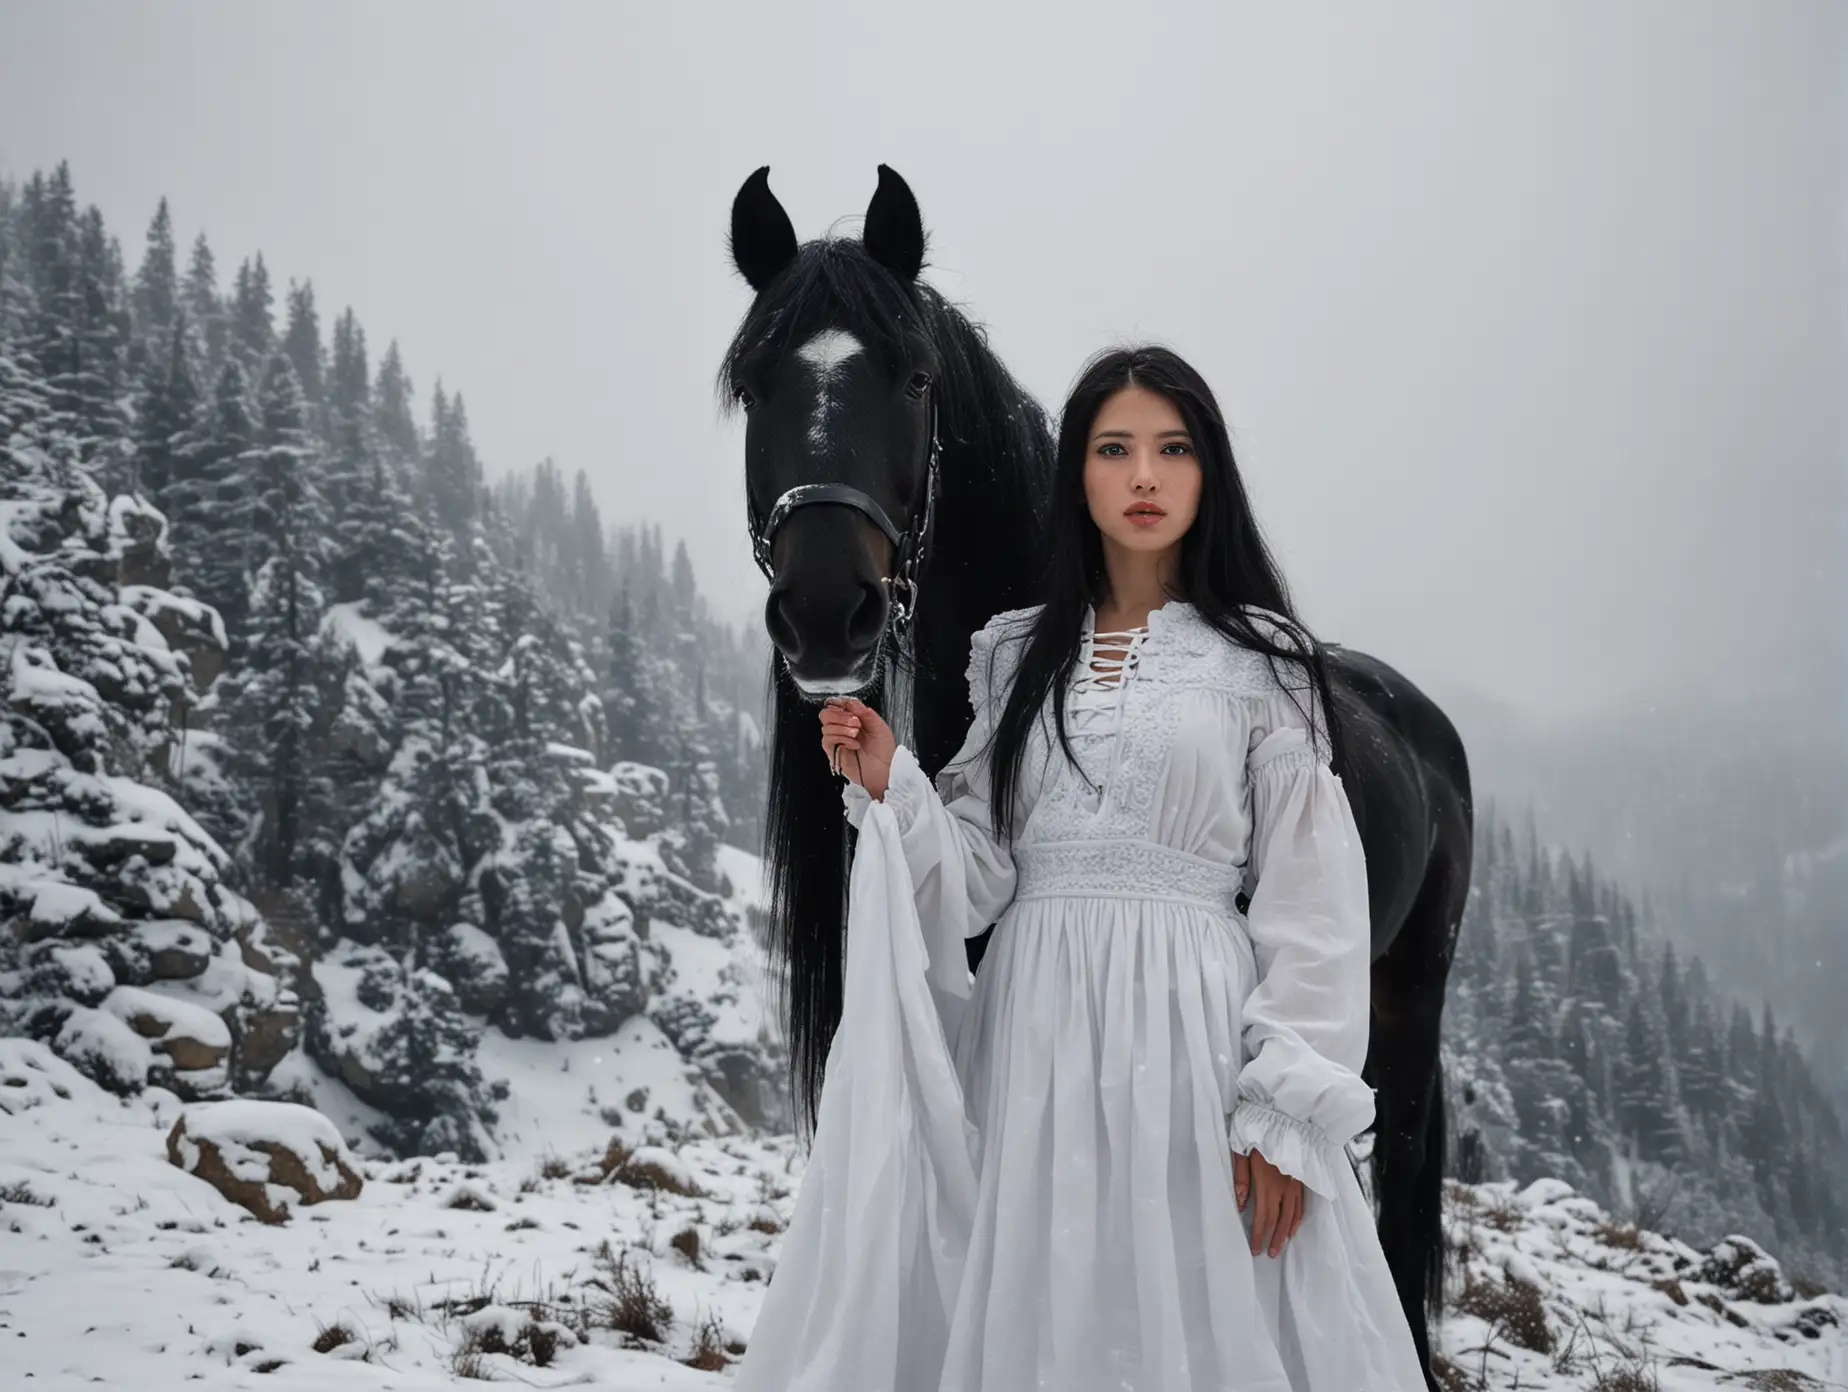 Girl-with-Long-Black-Hair-Standing-on-Mountain-Top-in-Snowy-Dress